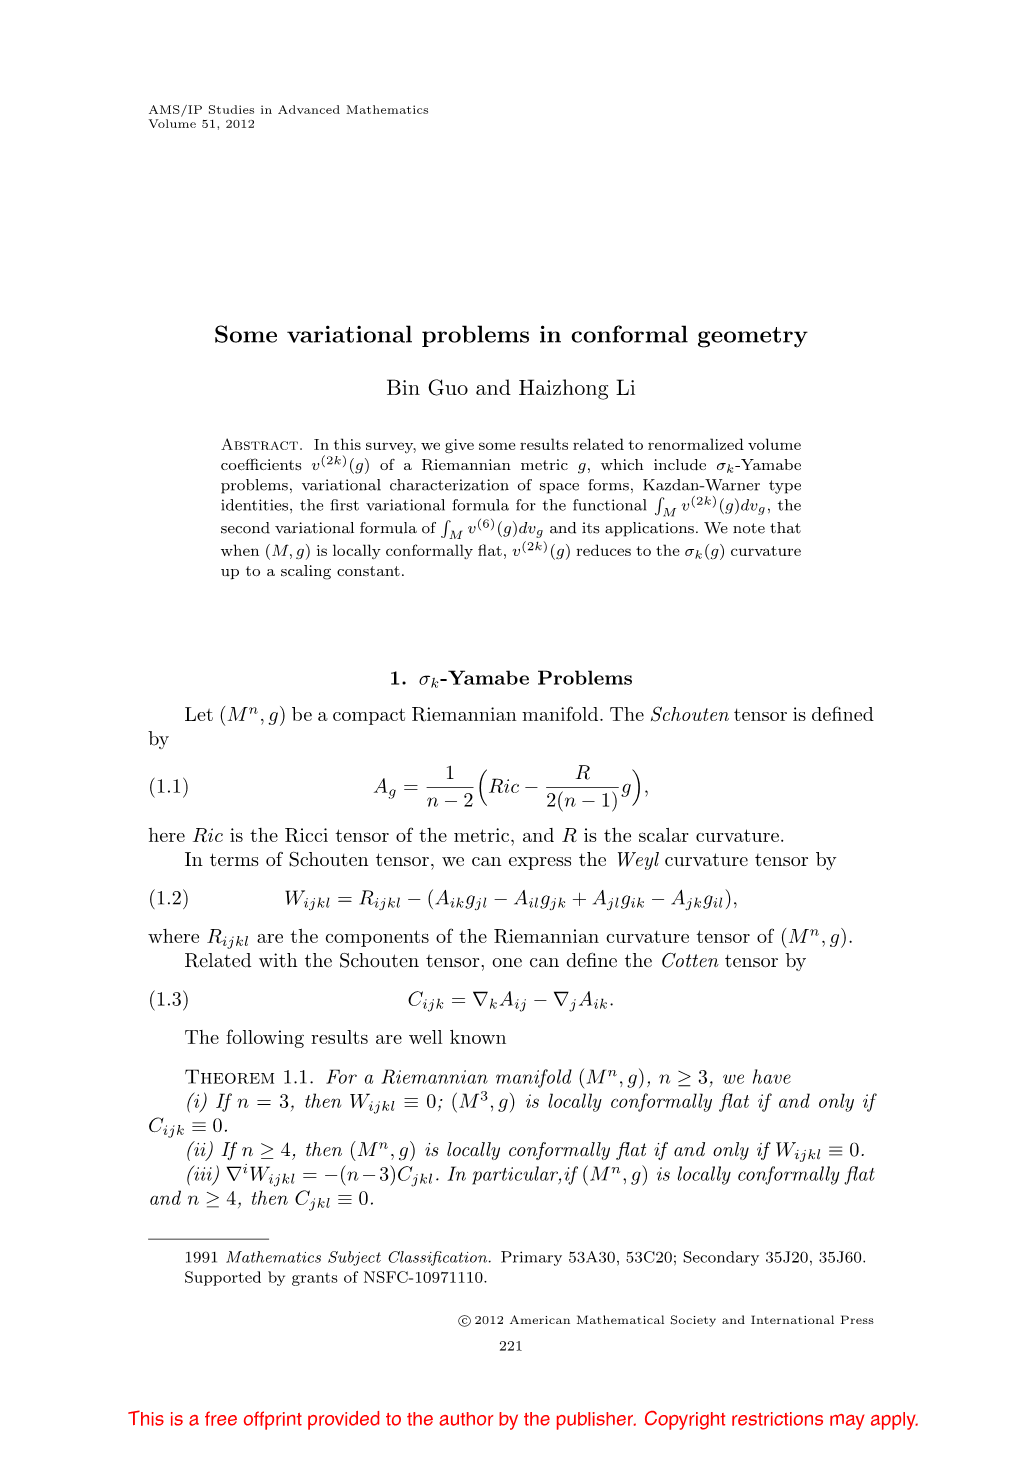 Some Variational Problems in Conformal Geometry